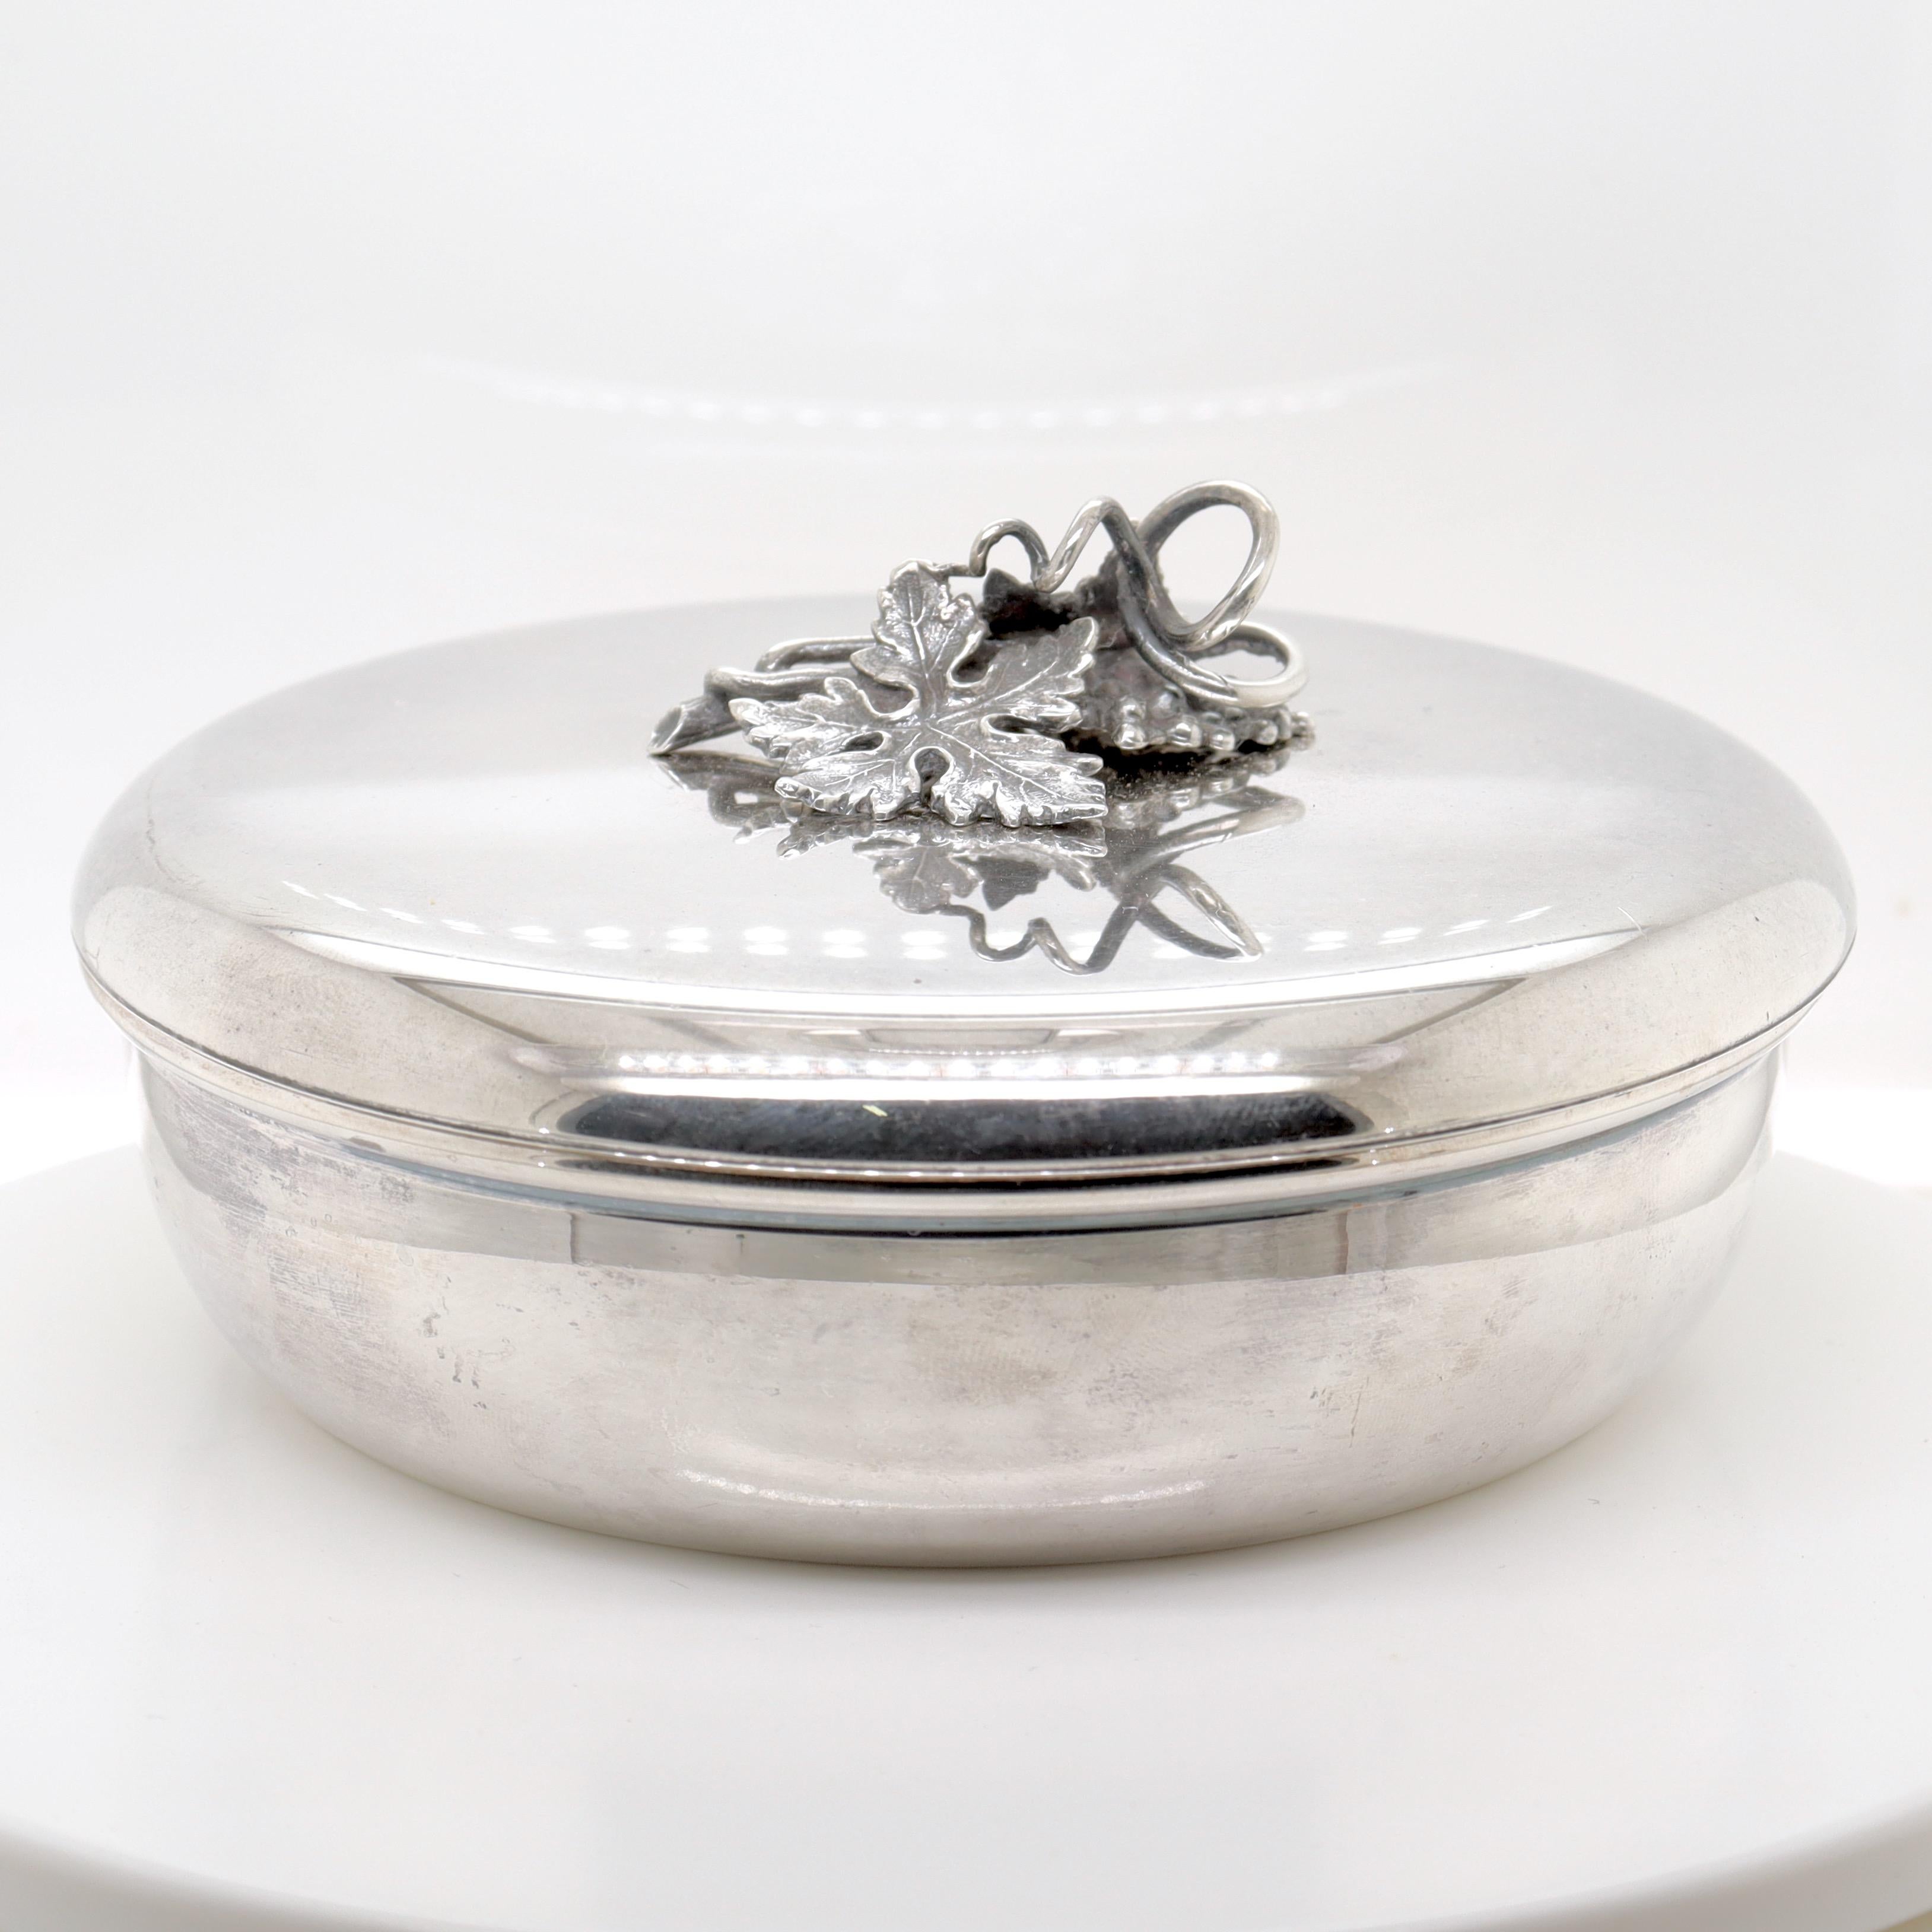 Modern Vintage Buccellati Sterling Silver Round Dresser Box with Grapes & Leaves Finial